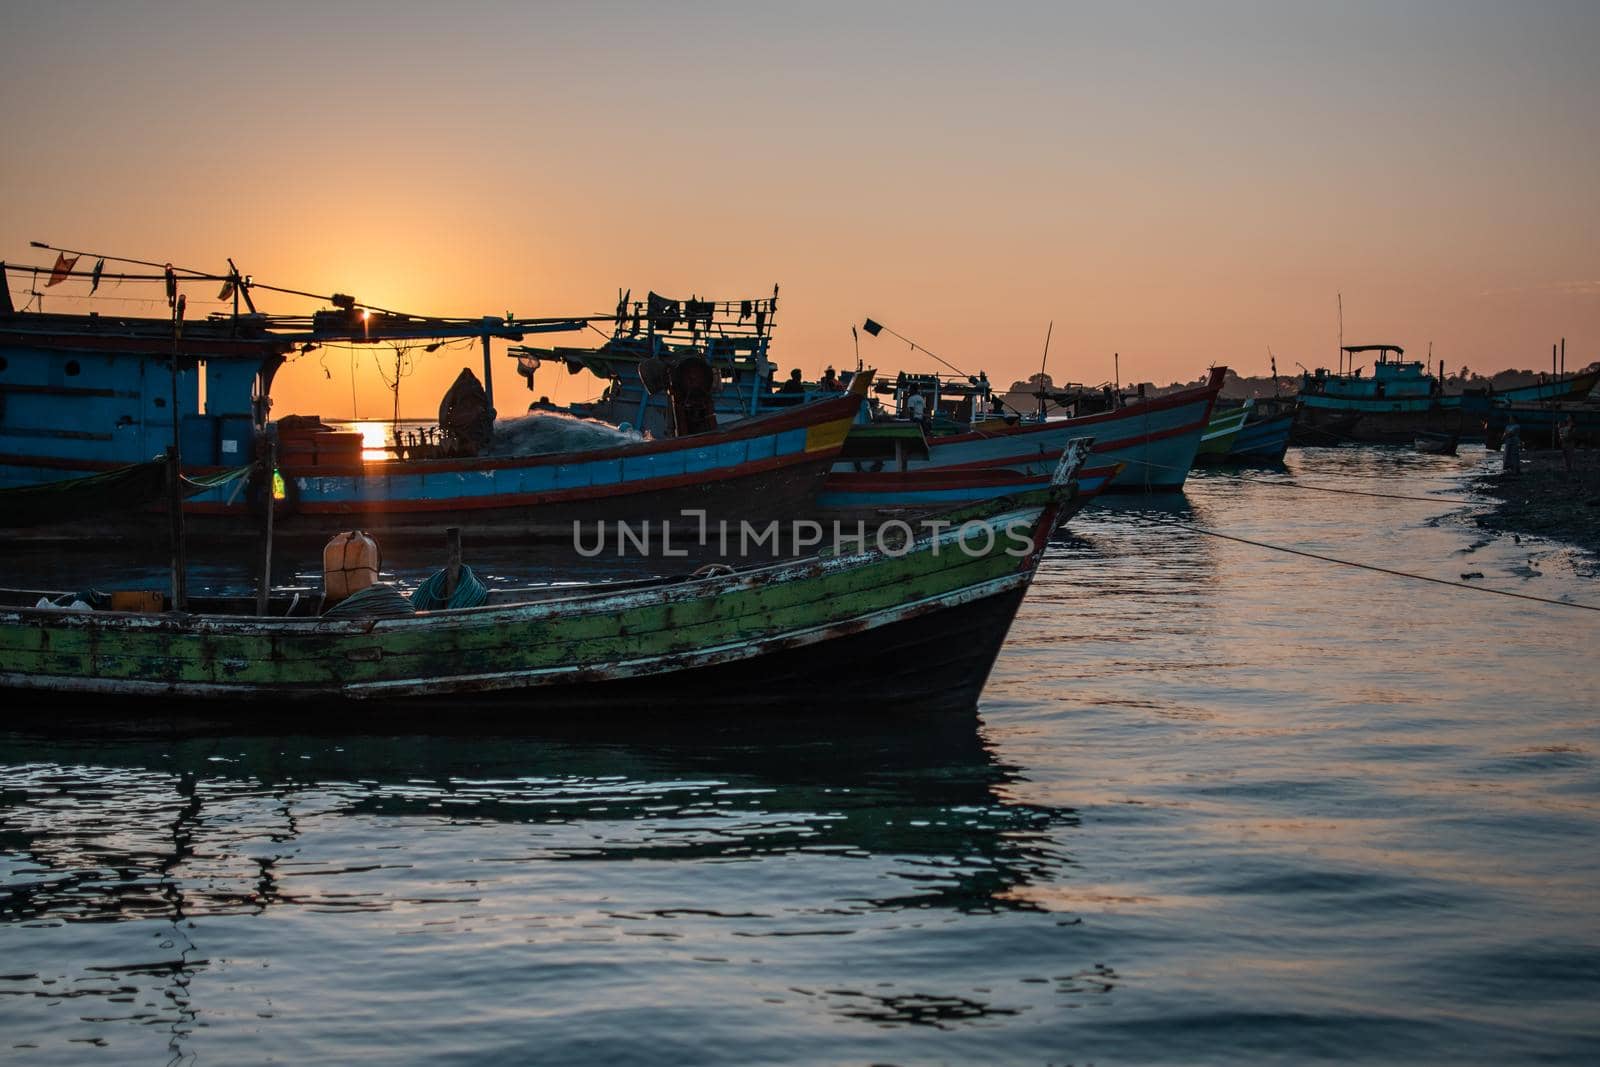 Sunset over colorful traditional wooden fishing boats, Cgaun Thar, Irrawaddy, Myanmar by arvidnorberg